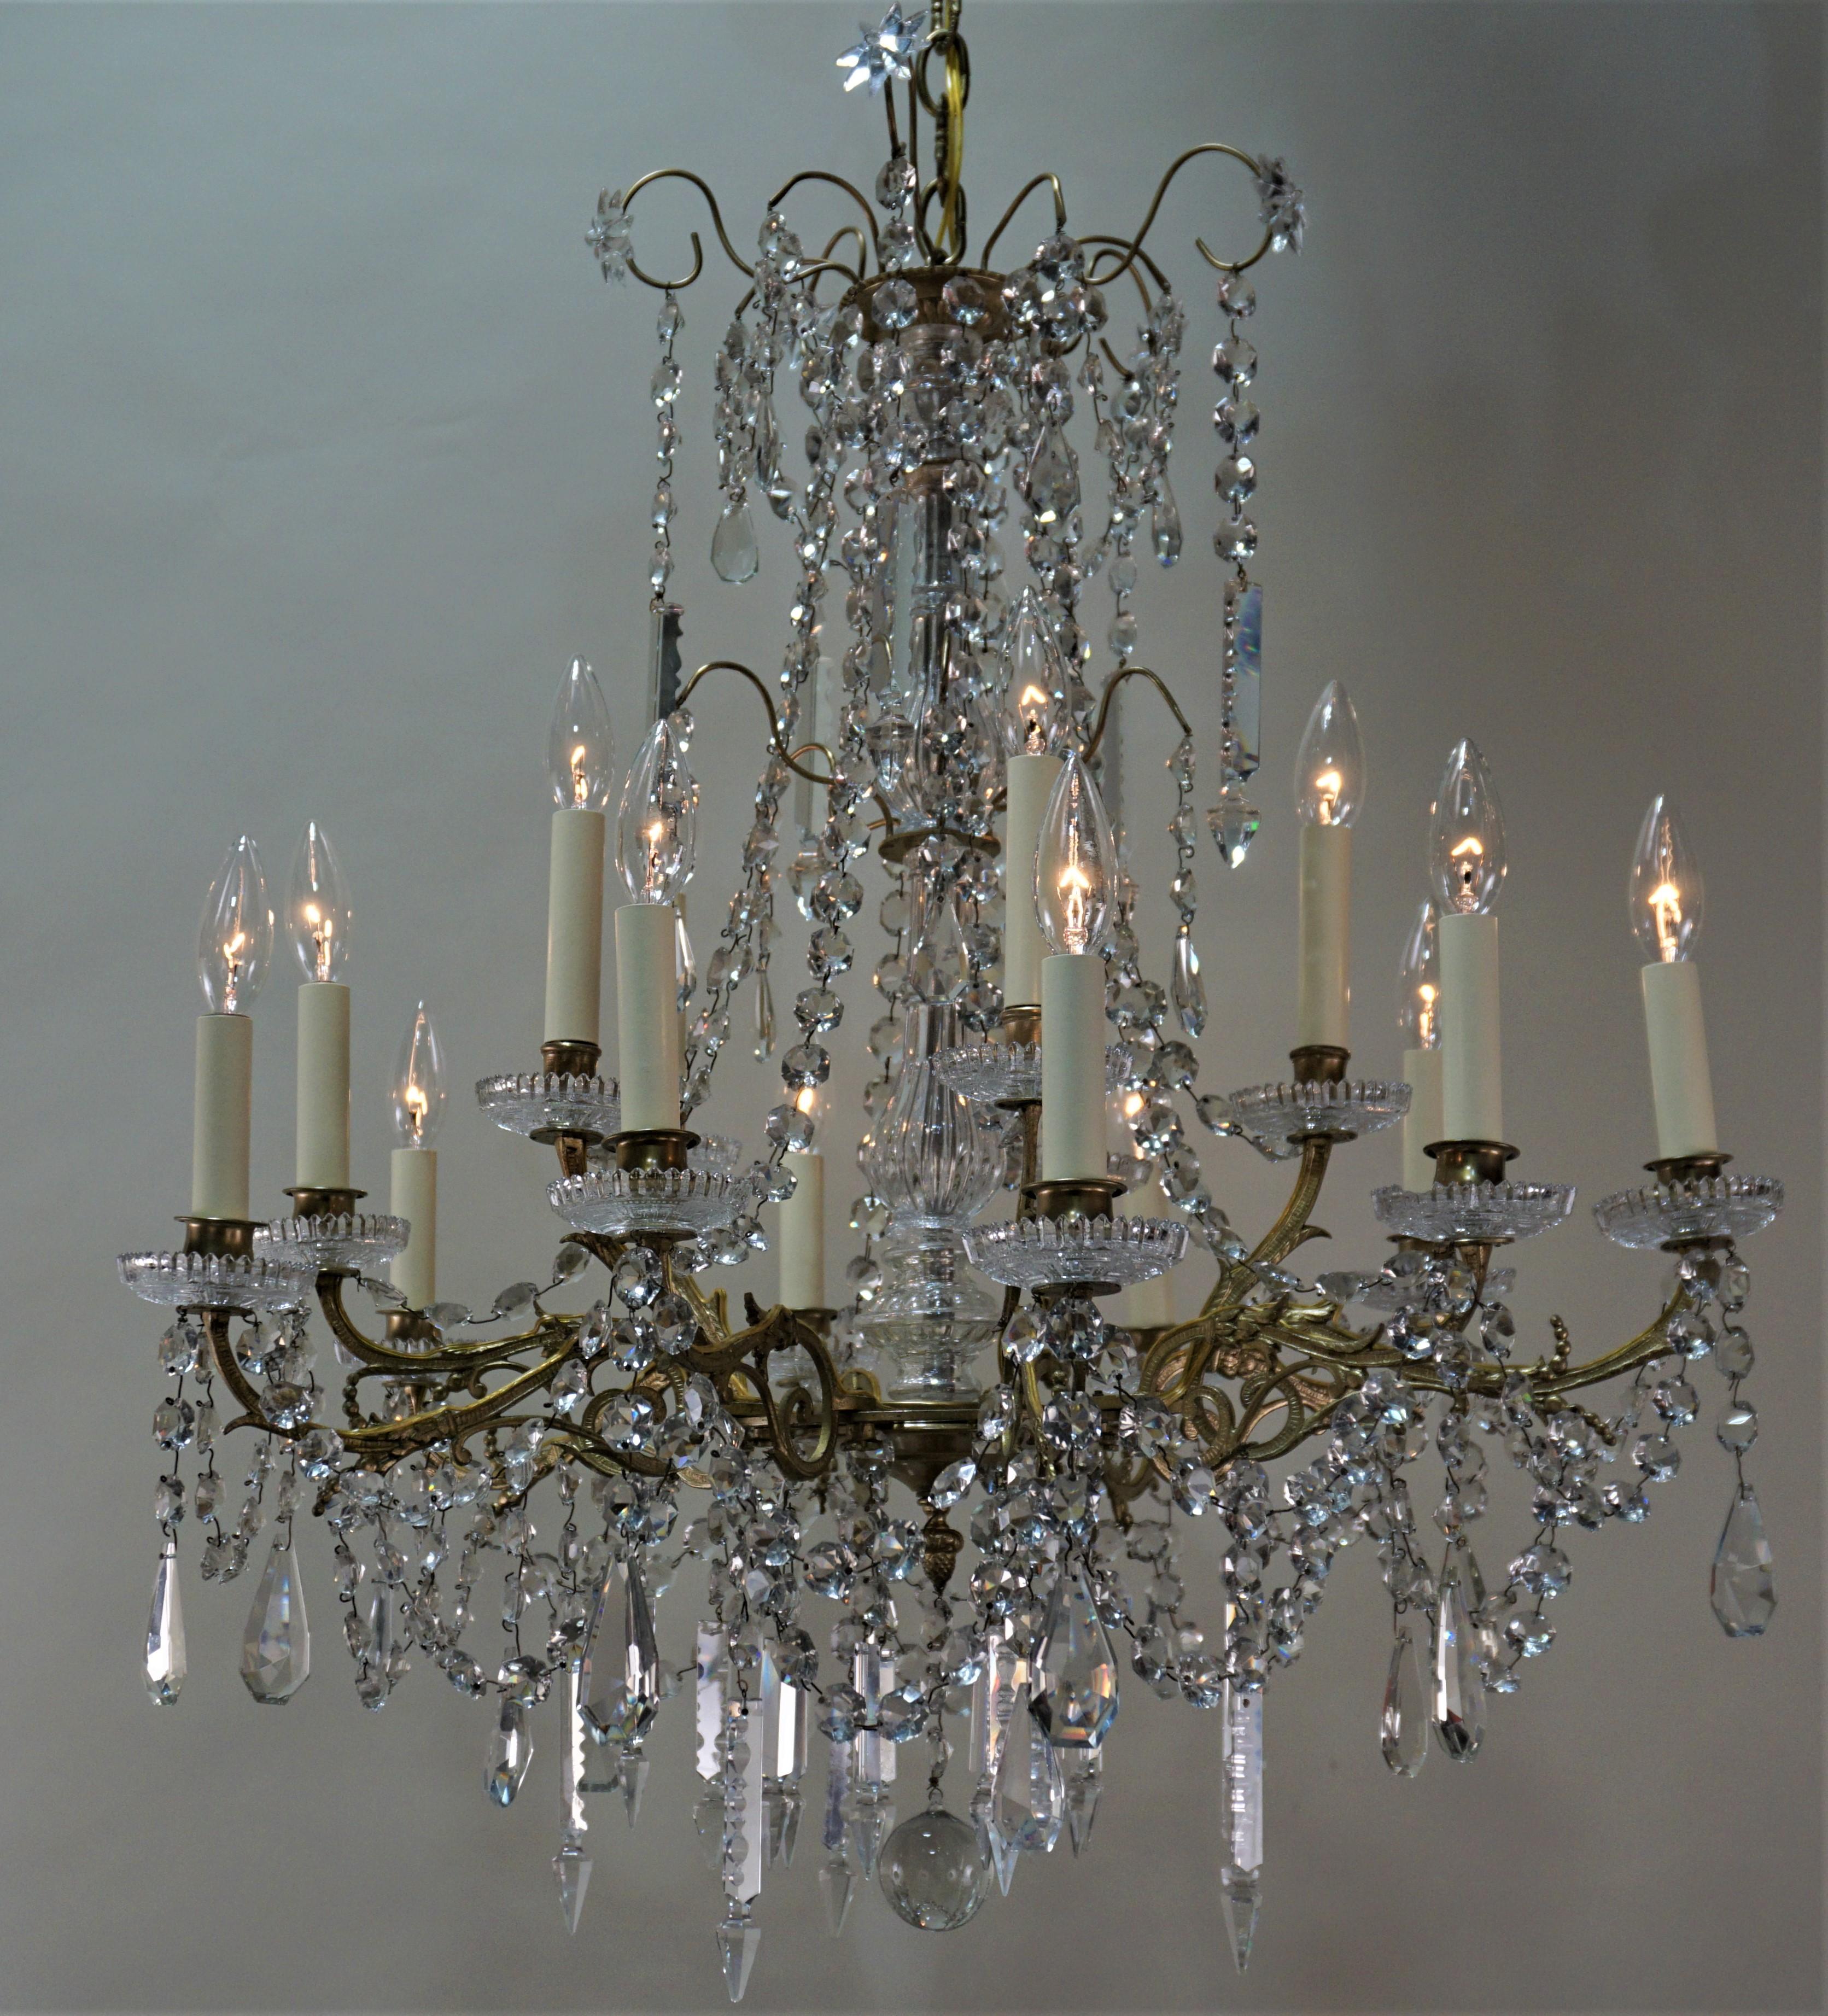 19 century fifteen-light crystal and bronze chandelier that has been electrified.
Minimum height fully installed with three links of chain is 36